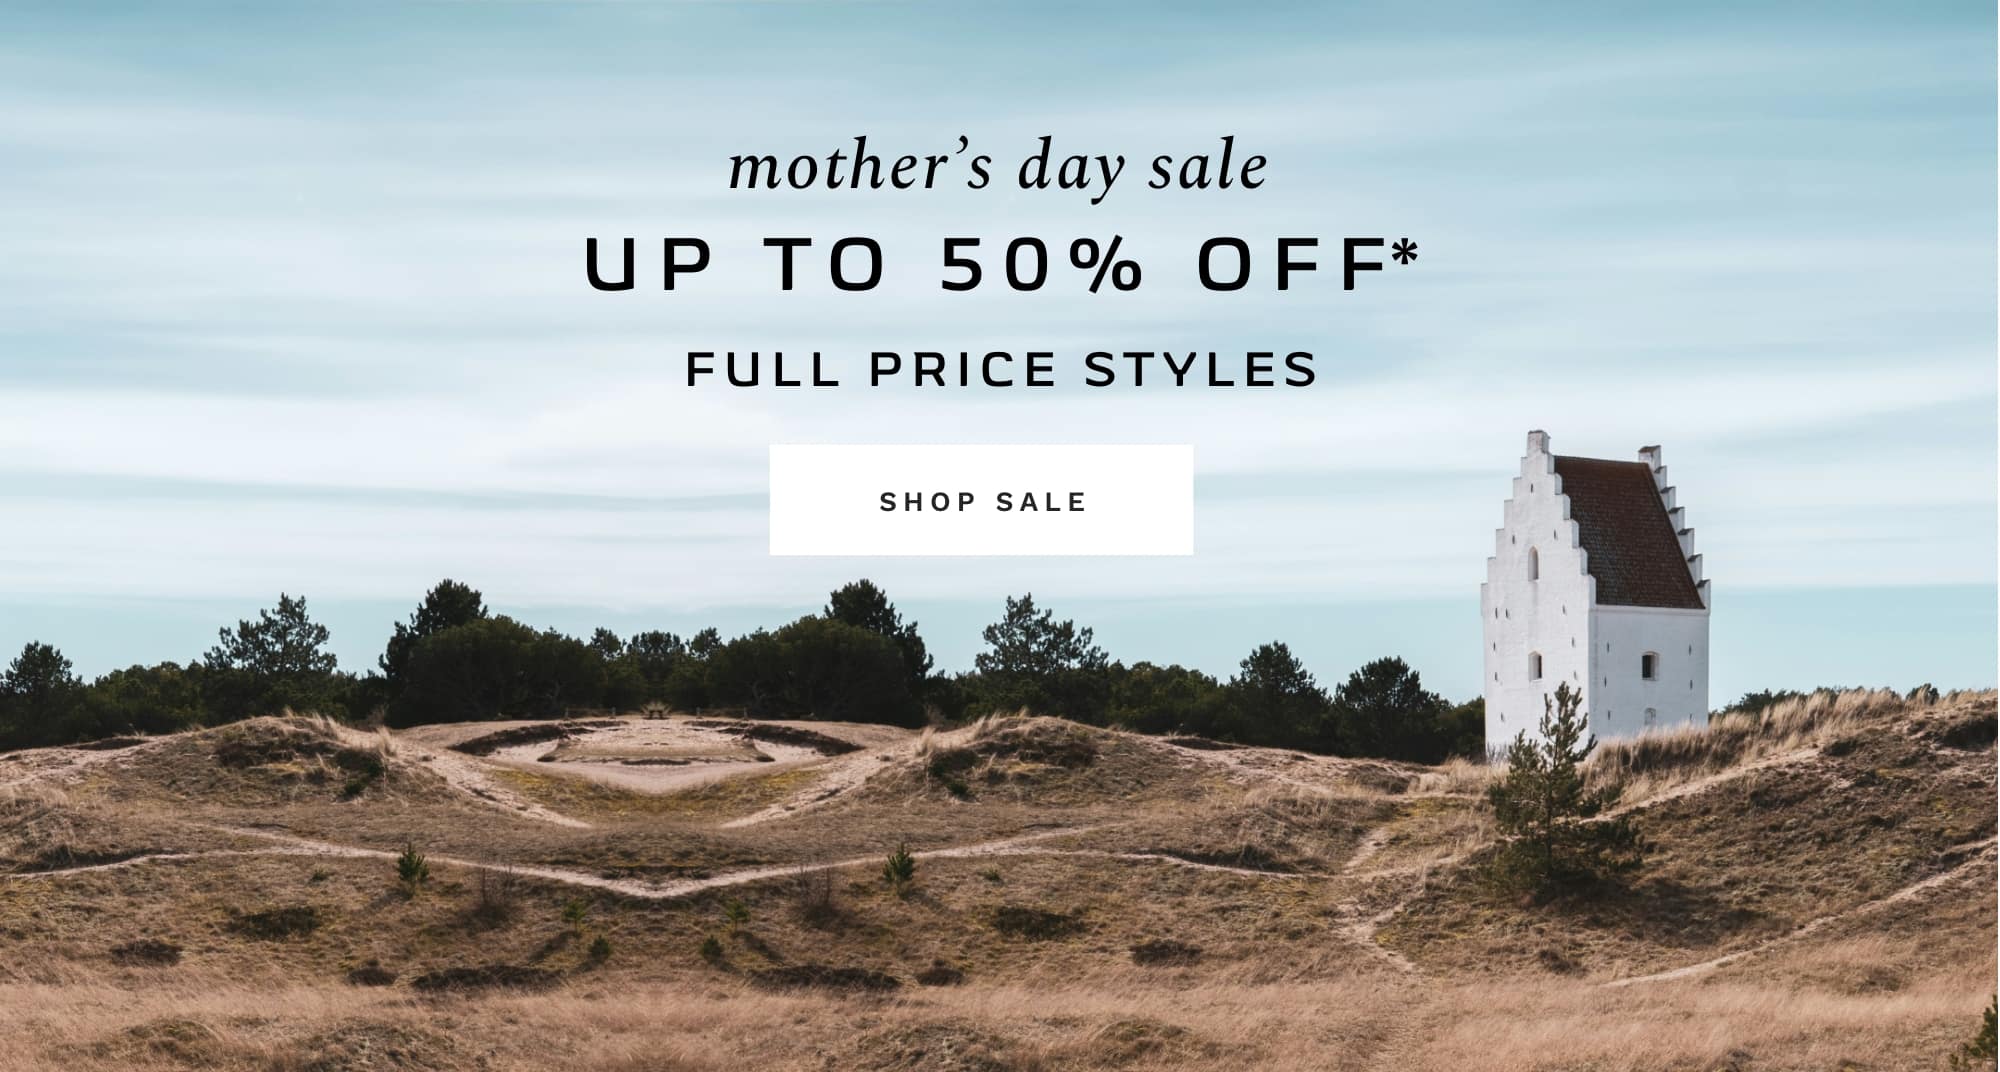 30% OFF* SITEWIDE